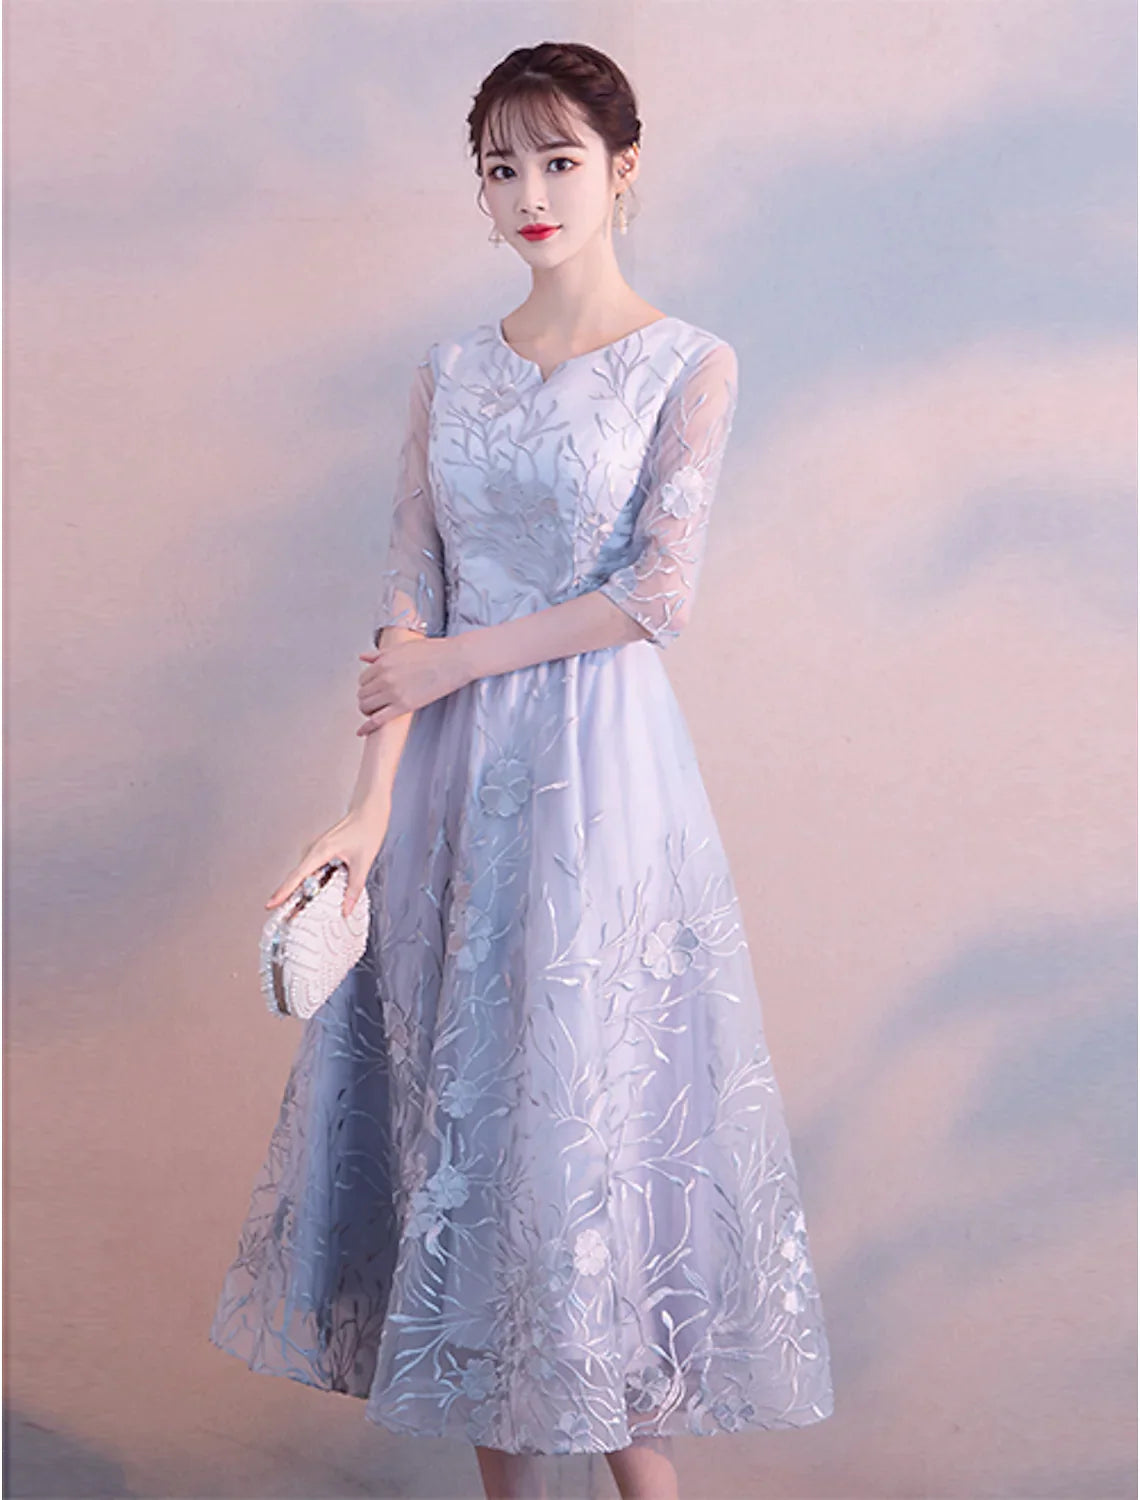 A-Line Elegant Cocktail Party Prom Dress Length Sleeve Length Lace with Lace Appliques